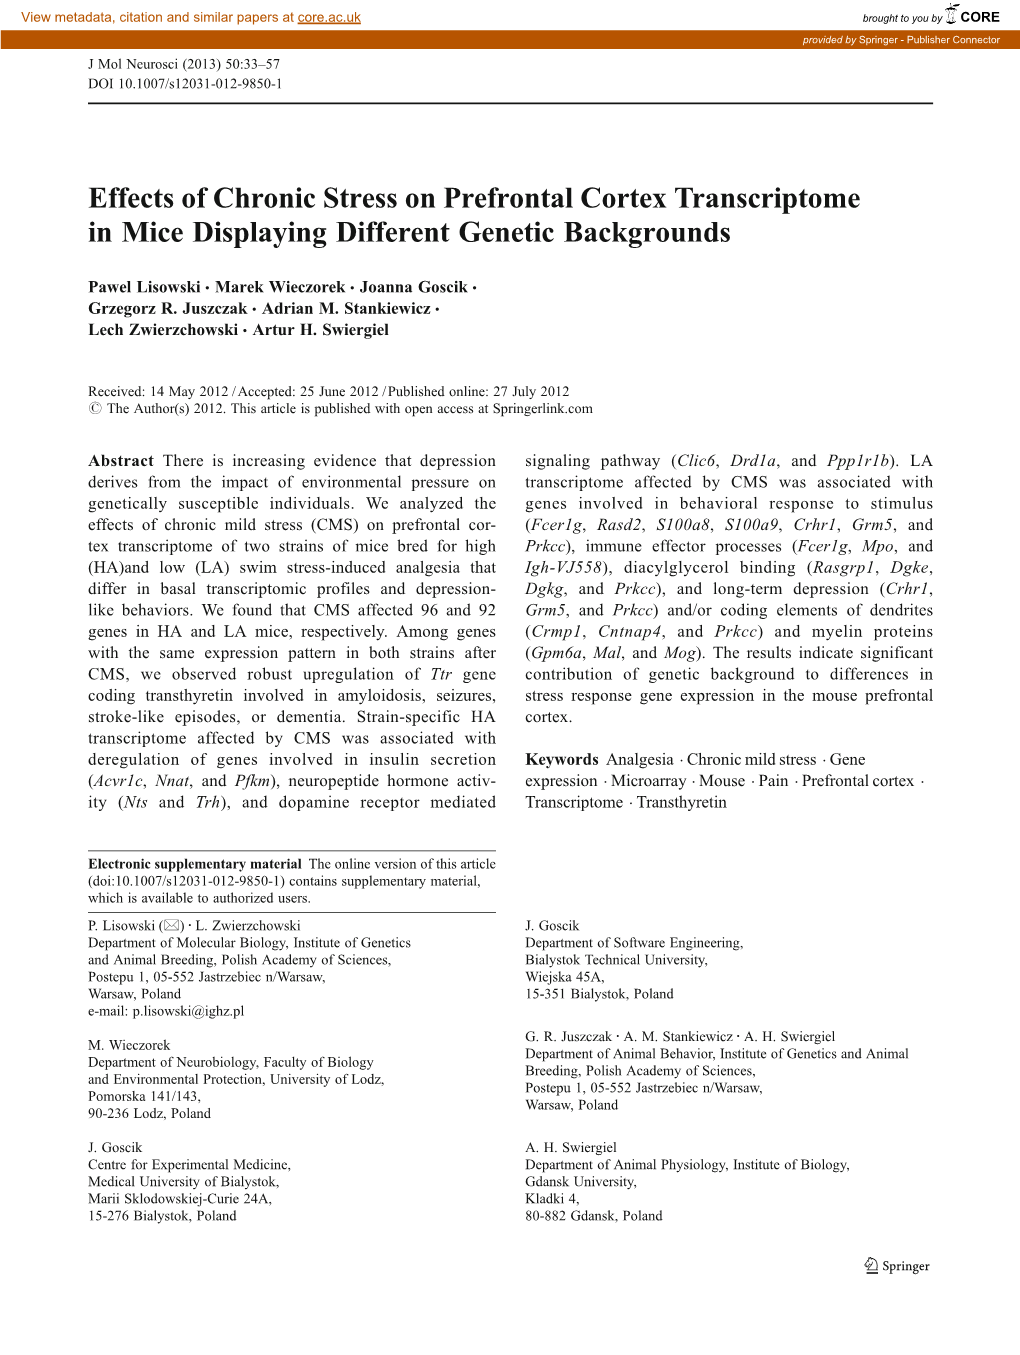 Effects of Chronic Stress on Prefrontal Cortex Transcriptome in Mice Displaying Different Genetic Backgrounds